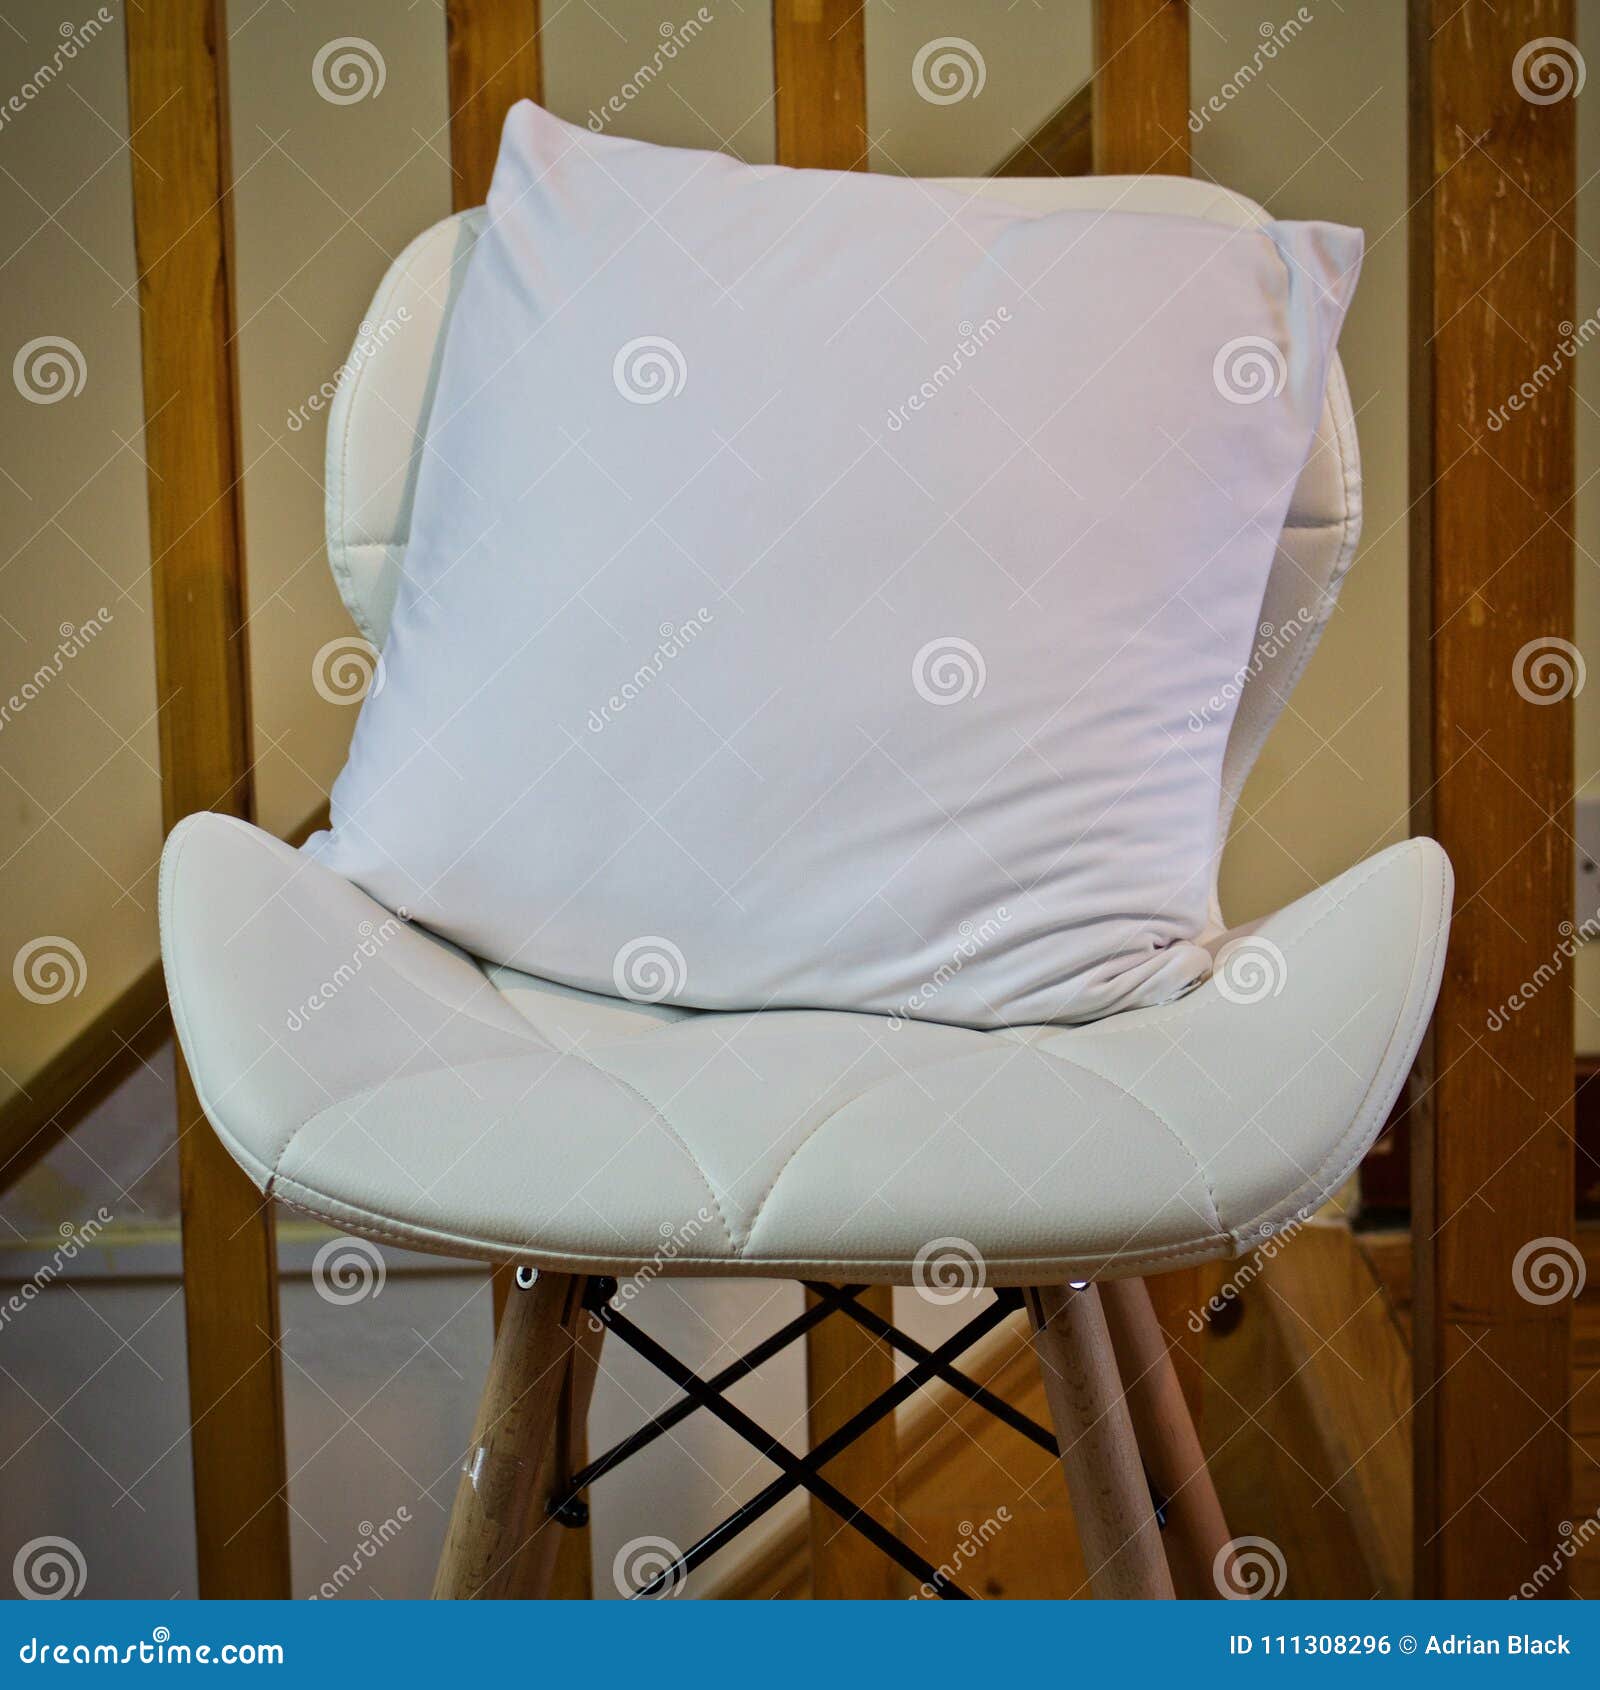 White small pillow mockup stock photo. Image of pillow - 111308296